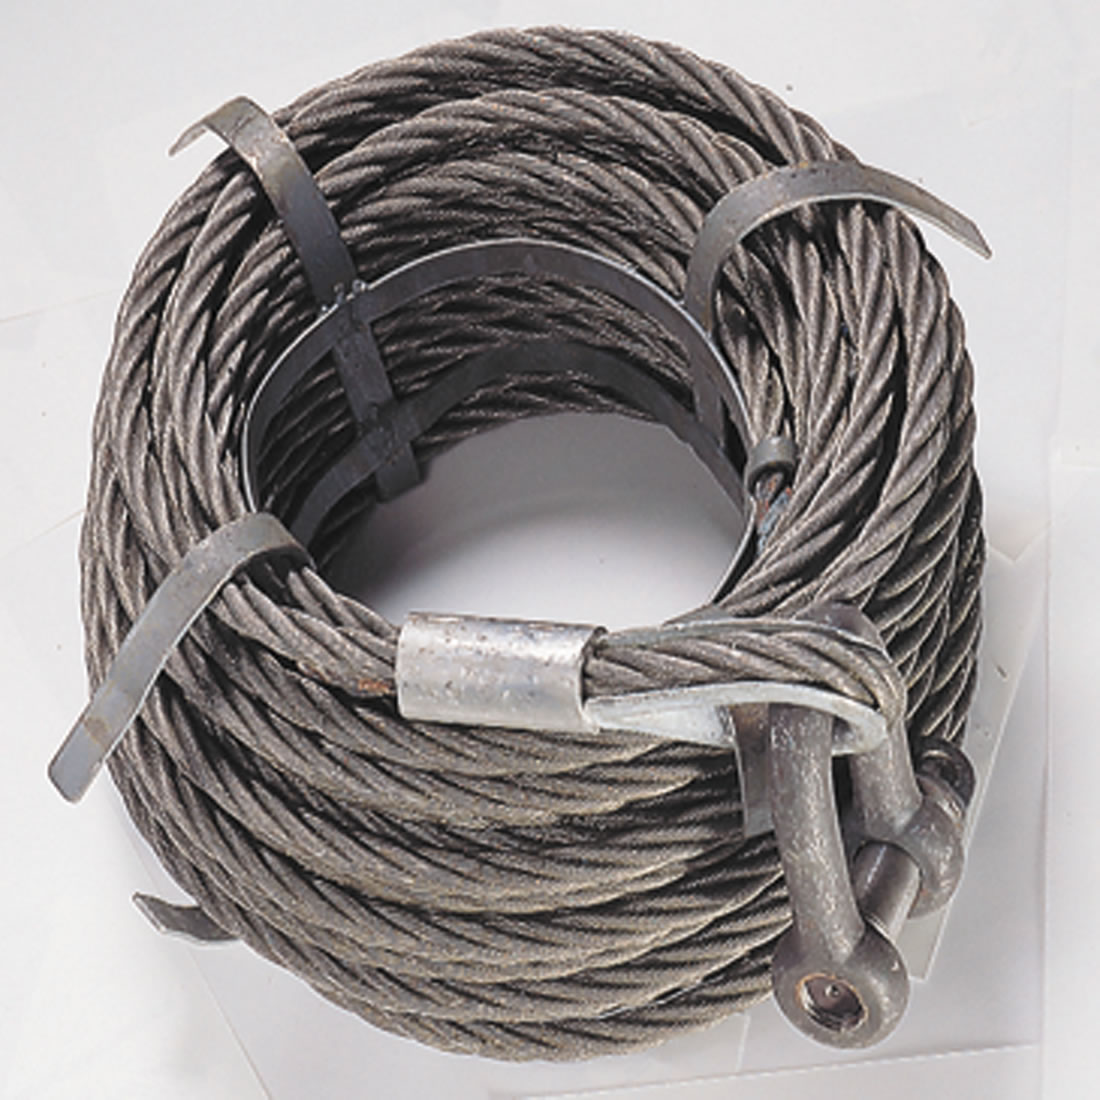 Tu8 Tirfor Winch Cable 10M